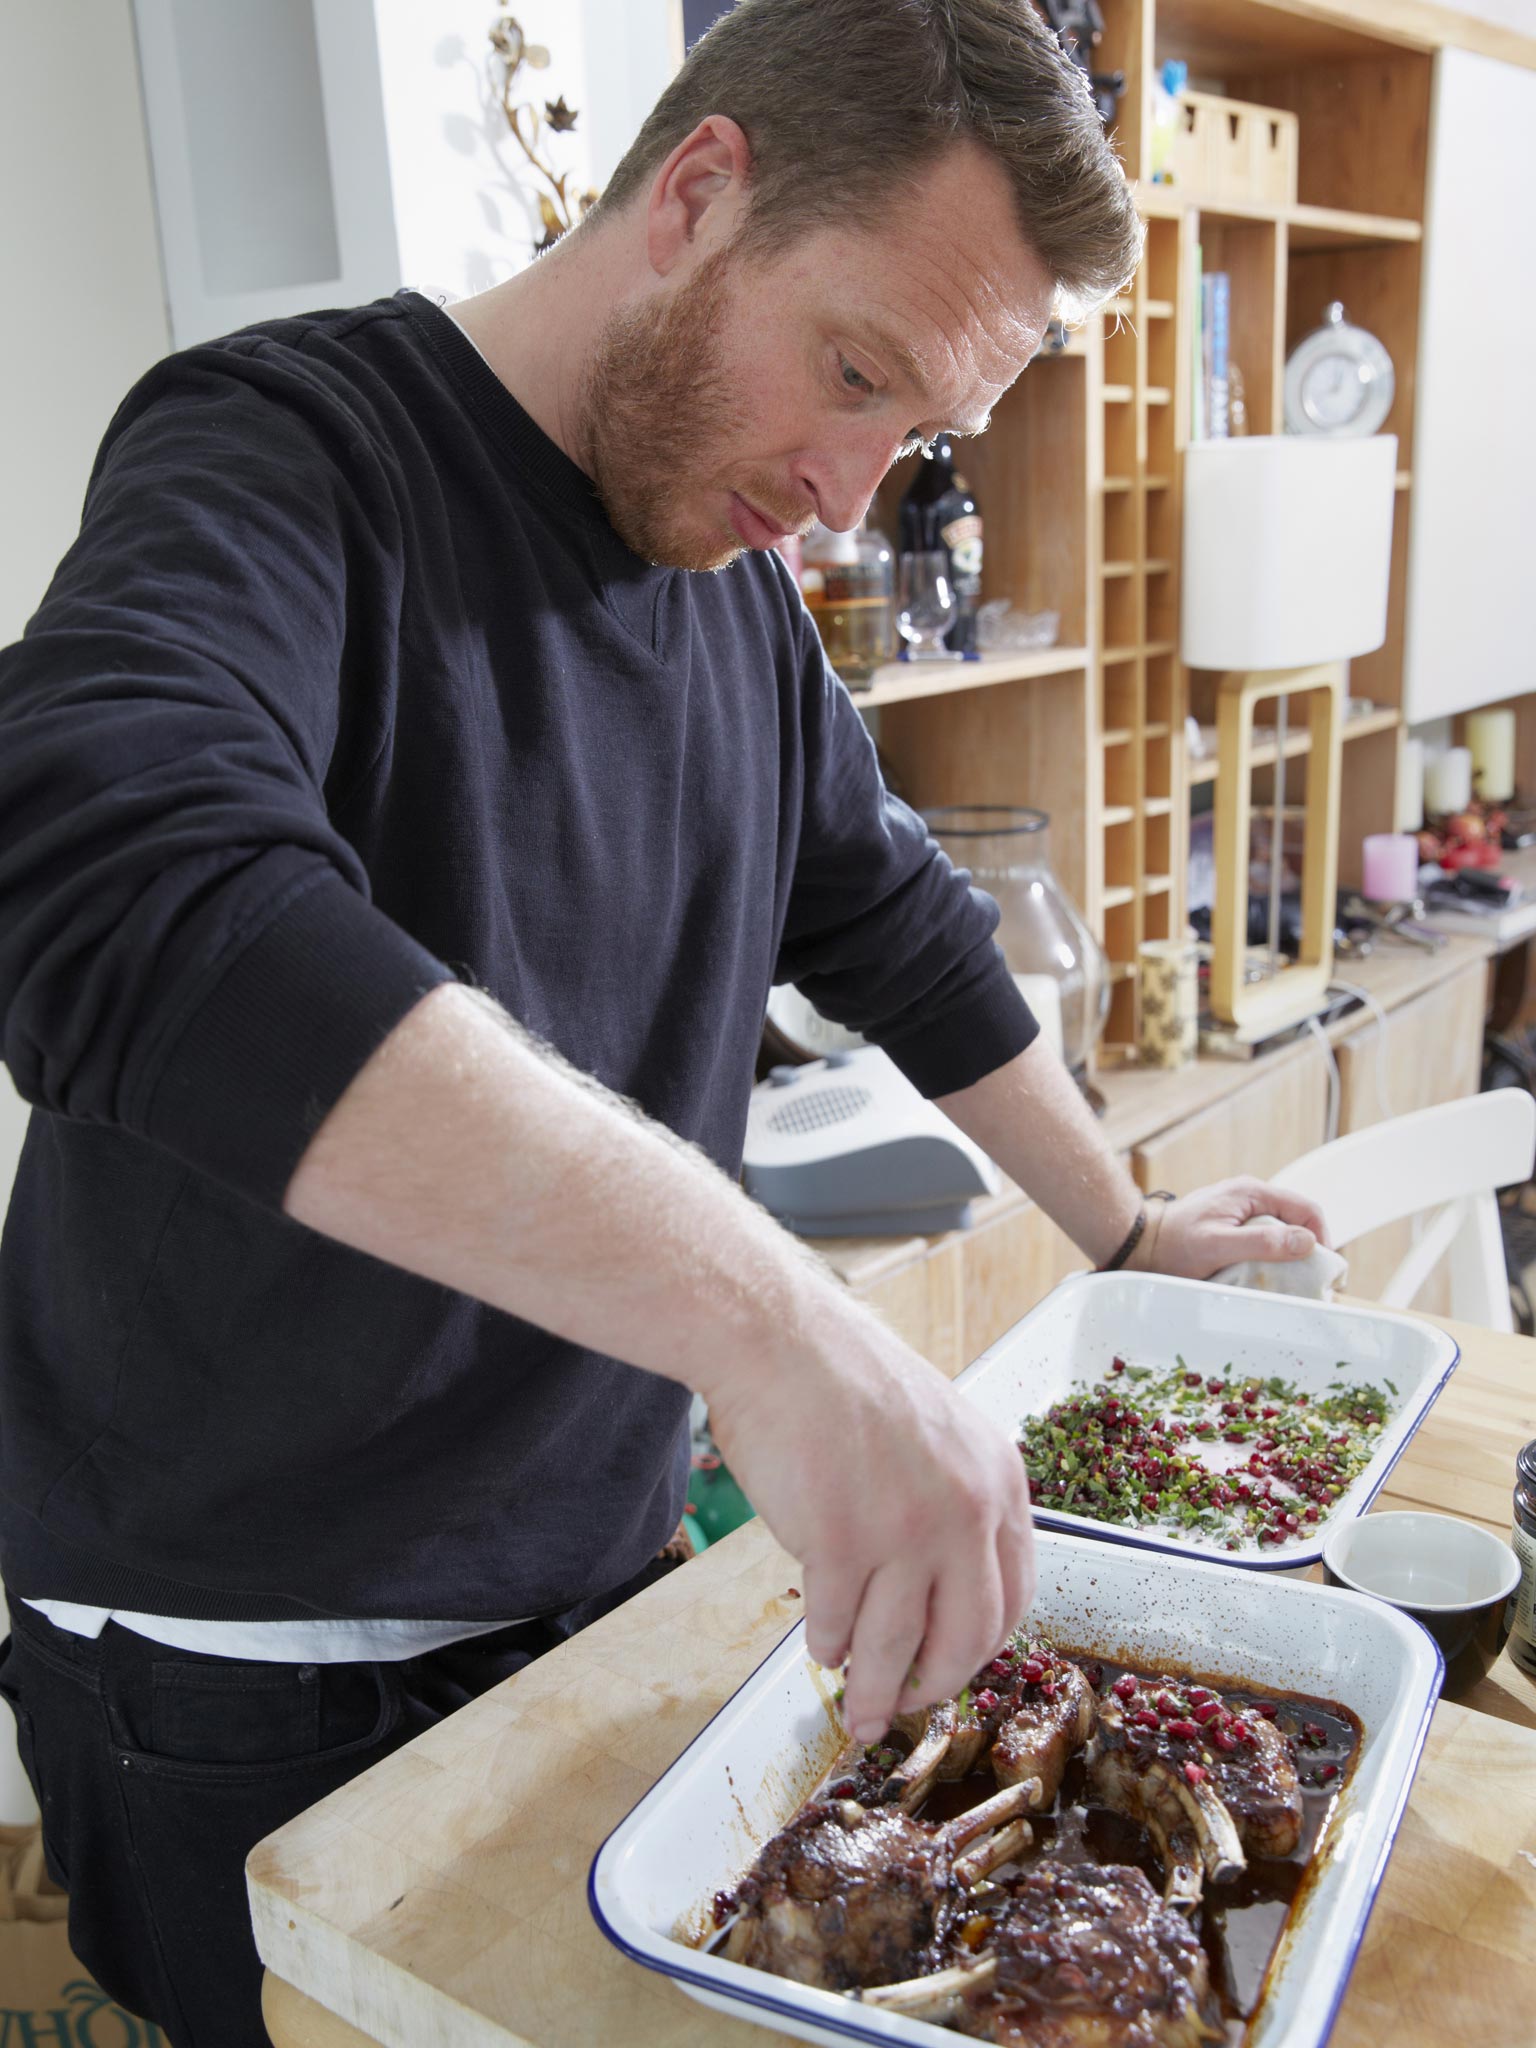 Strange brew: the chef John Quilter garnishes his lamb cutlets, enriched with the surprising flavour of coffee